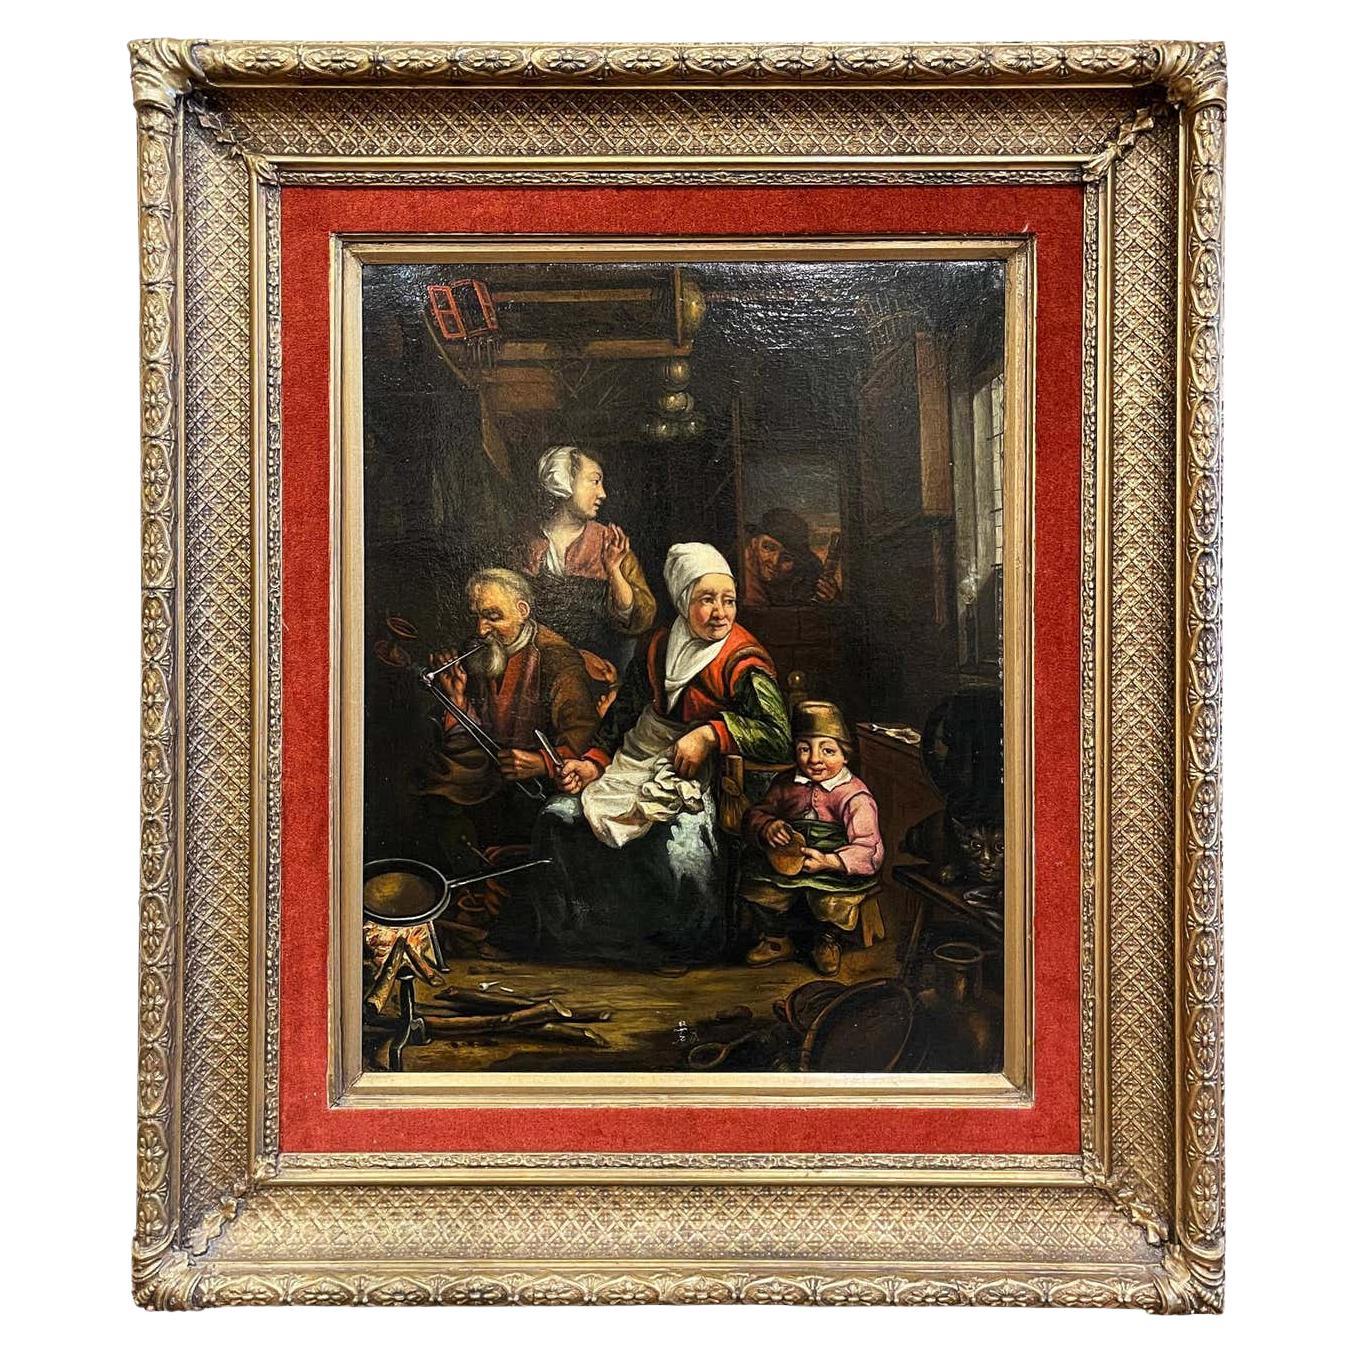 19th Century Dutch Oil on Canvas Painting in Carved Gilt Frame After D. Teniers